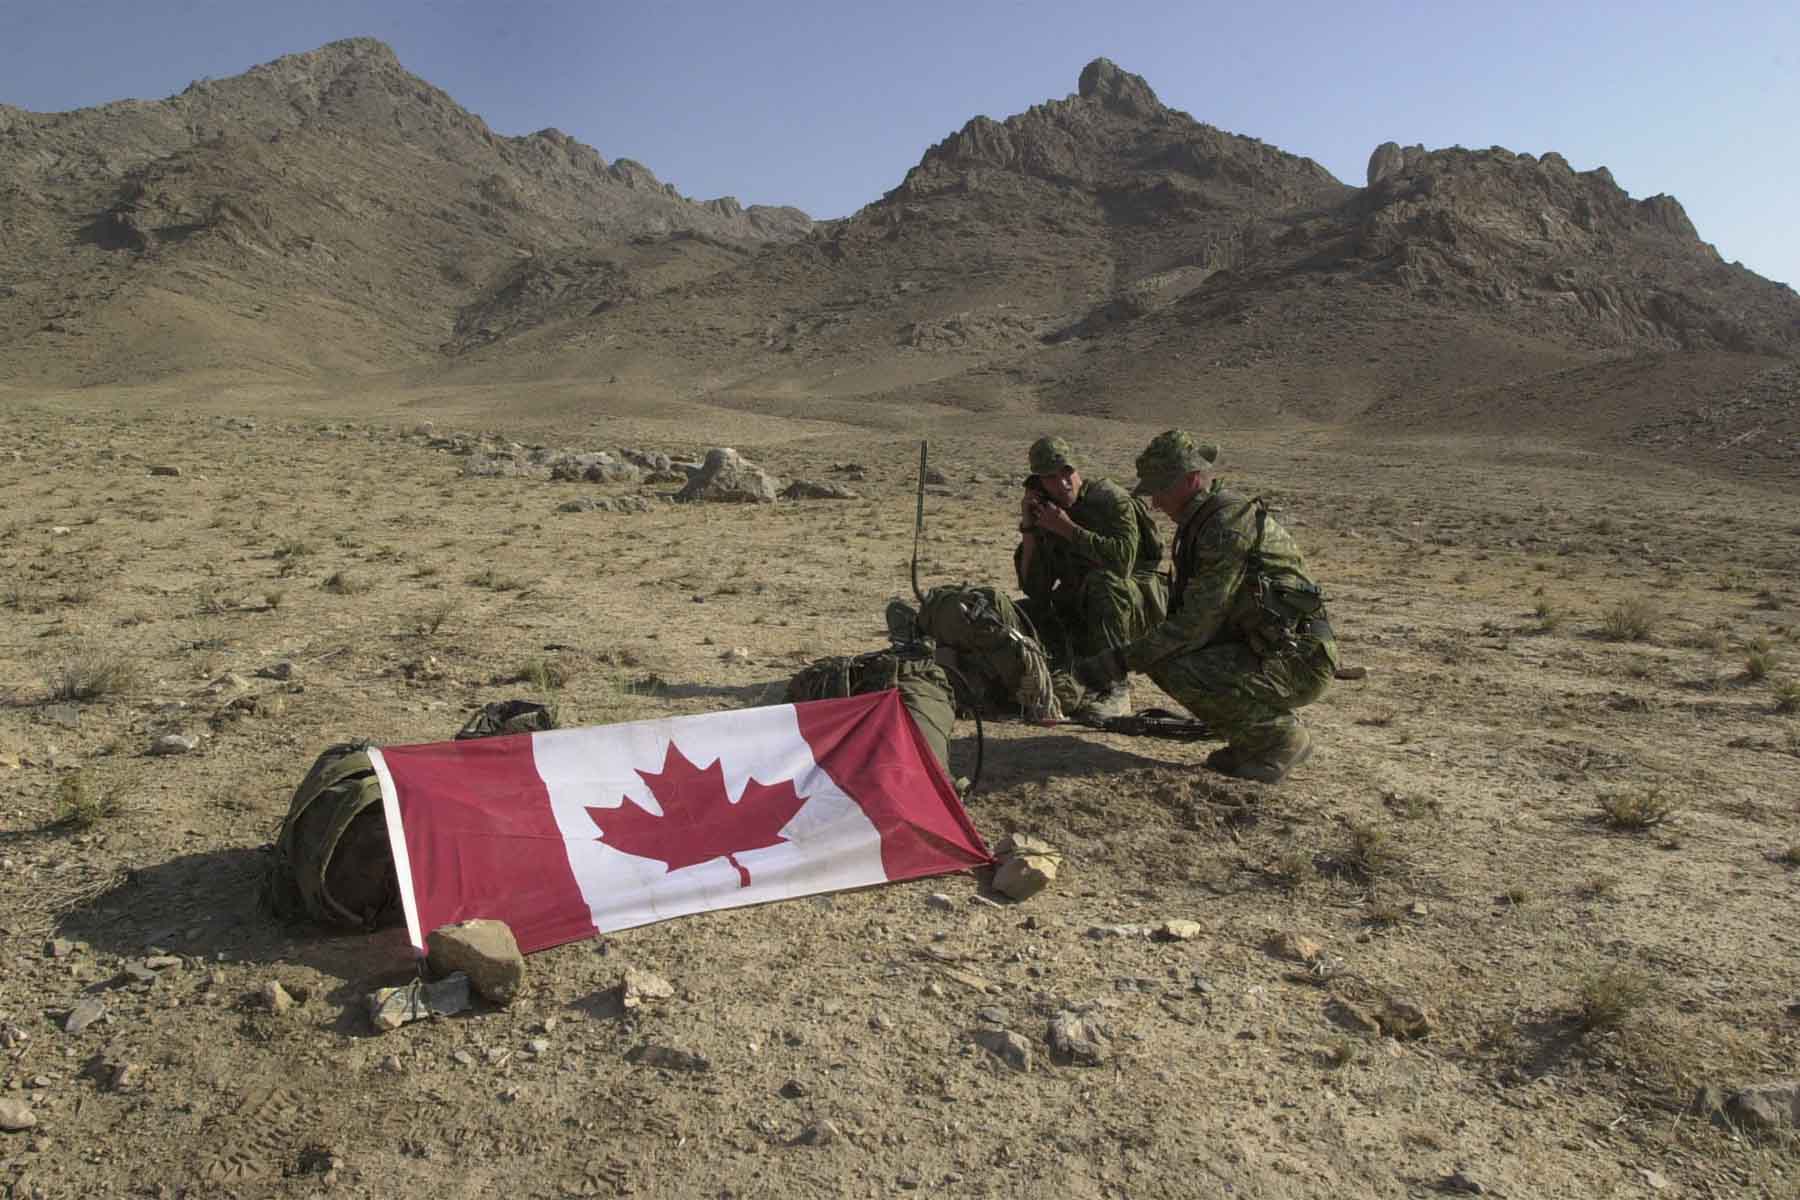 A 2002 photo of Canadian soldiers in Afghanistan with the Canadian flag.